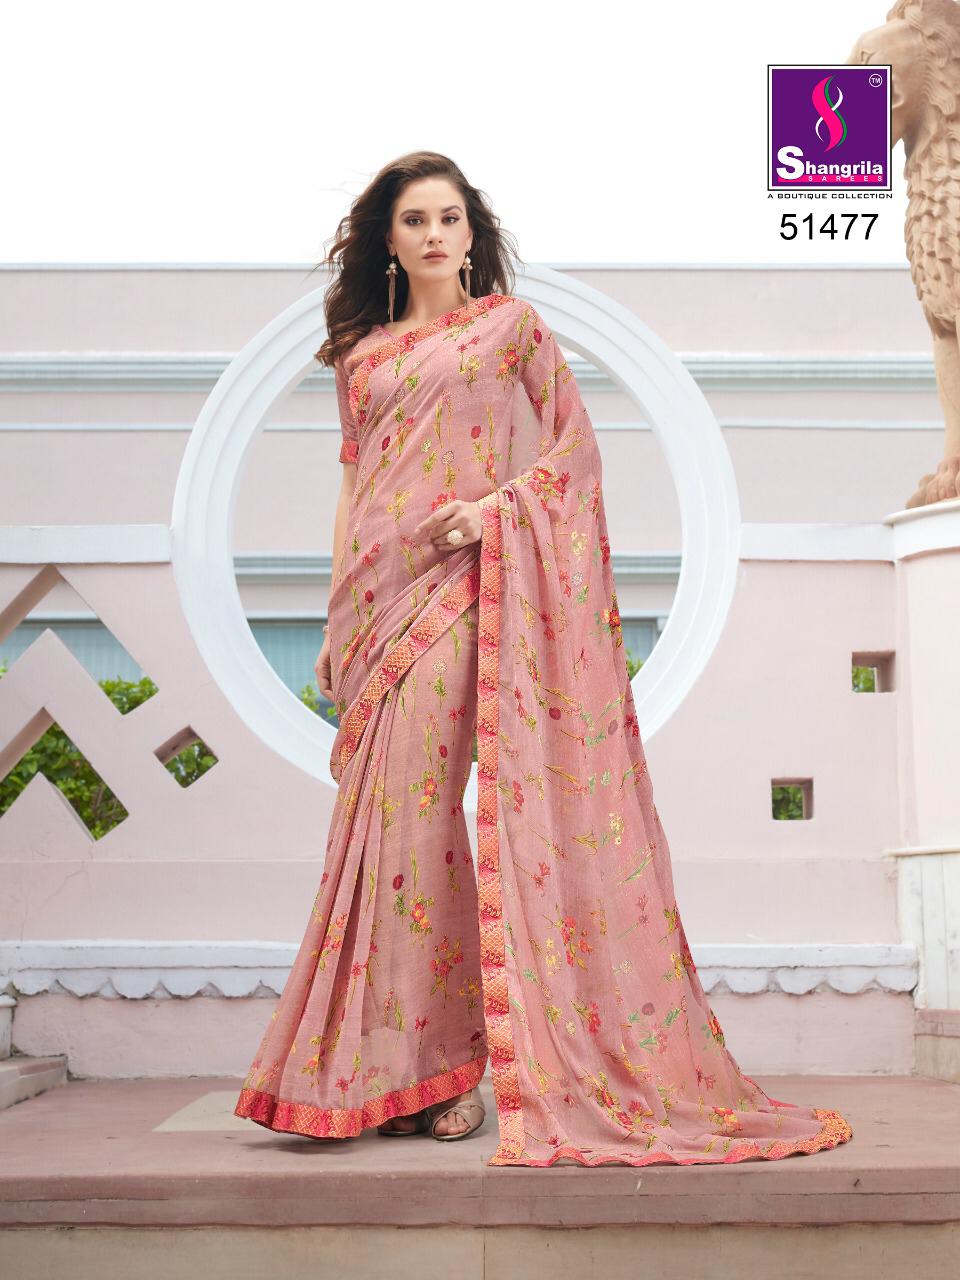 Shangrila fortune vol-2 beautiful collection of sarees in factory rates